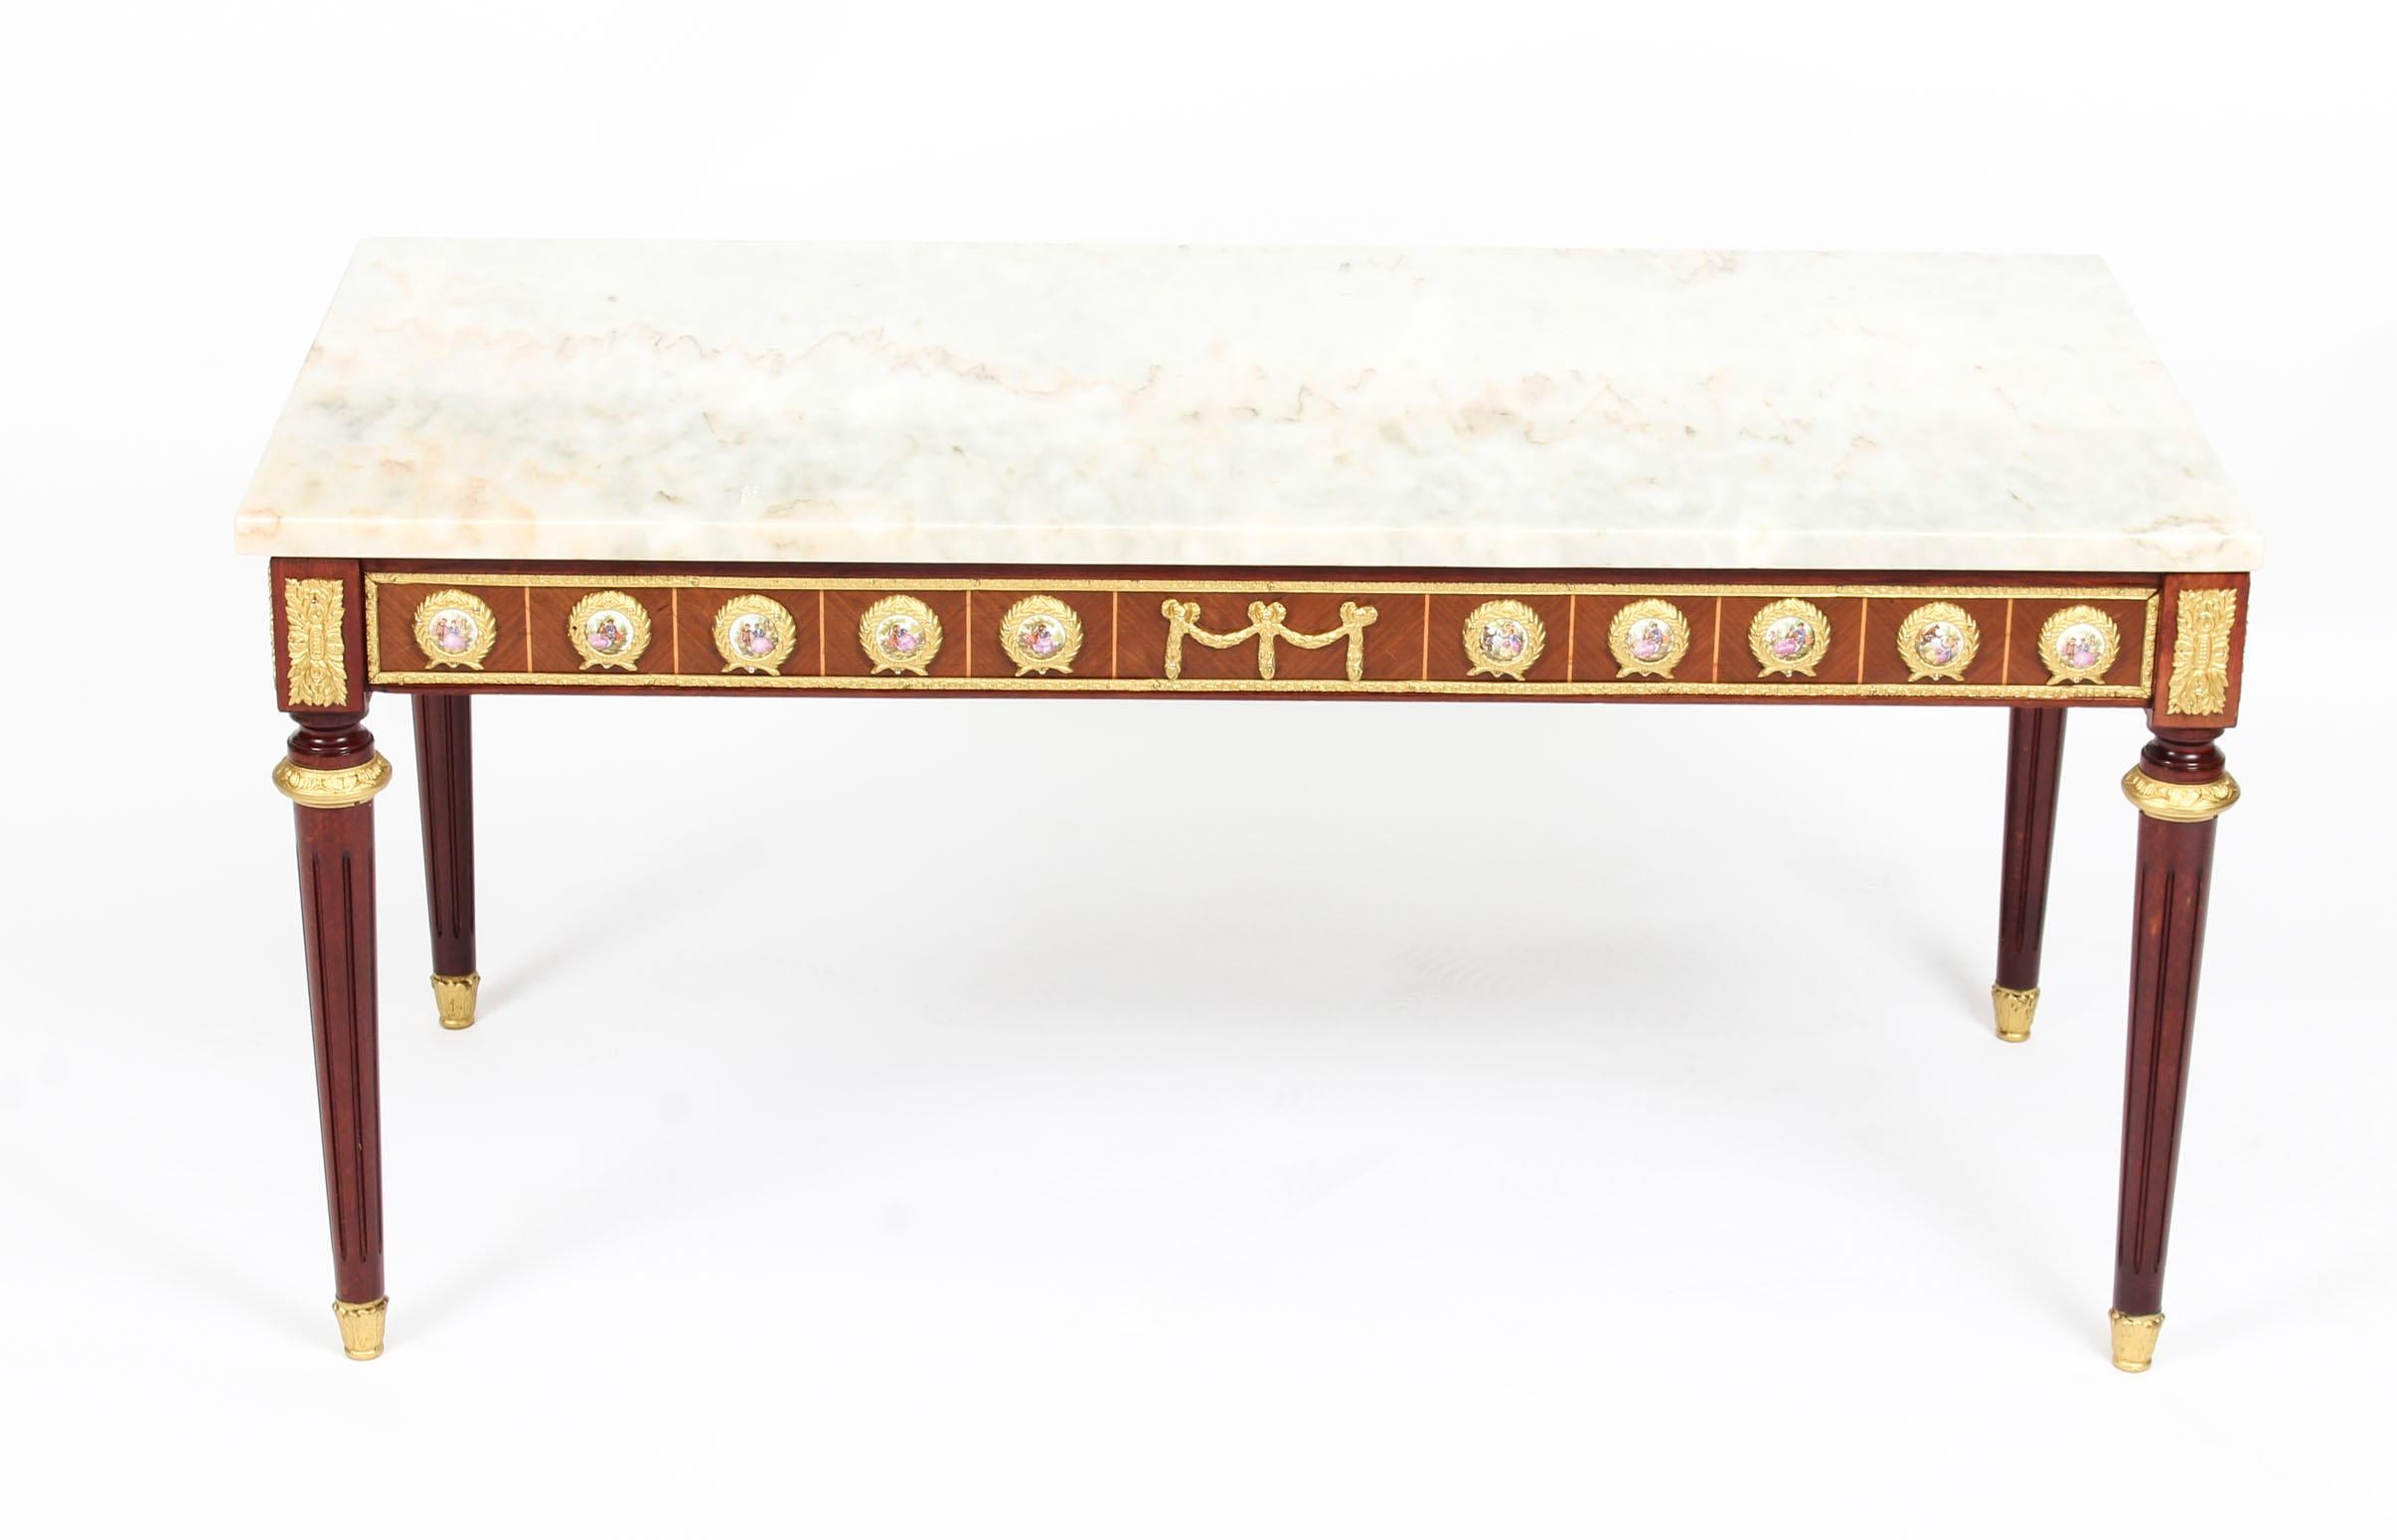 This is an exquisite ormolu-mounted walnut and kingwood marble top coffee table, circa 1950 in date and by the renowned furniture makers H & L Epstein.

This wonderful coffee table is rectangular in shape and has four elegant and stylish tapering